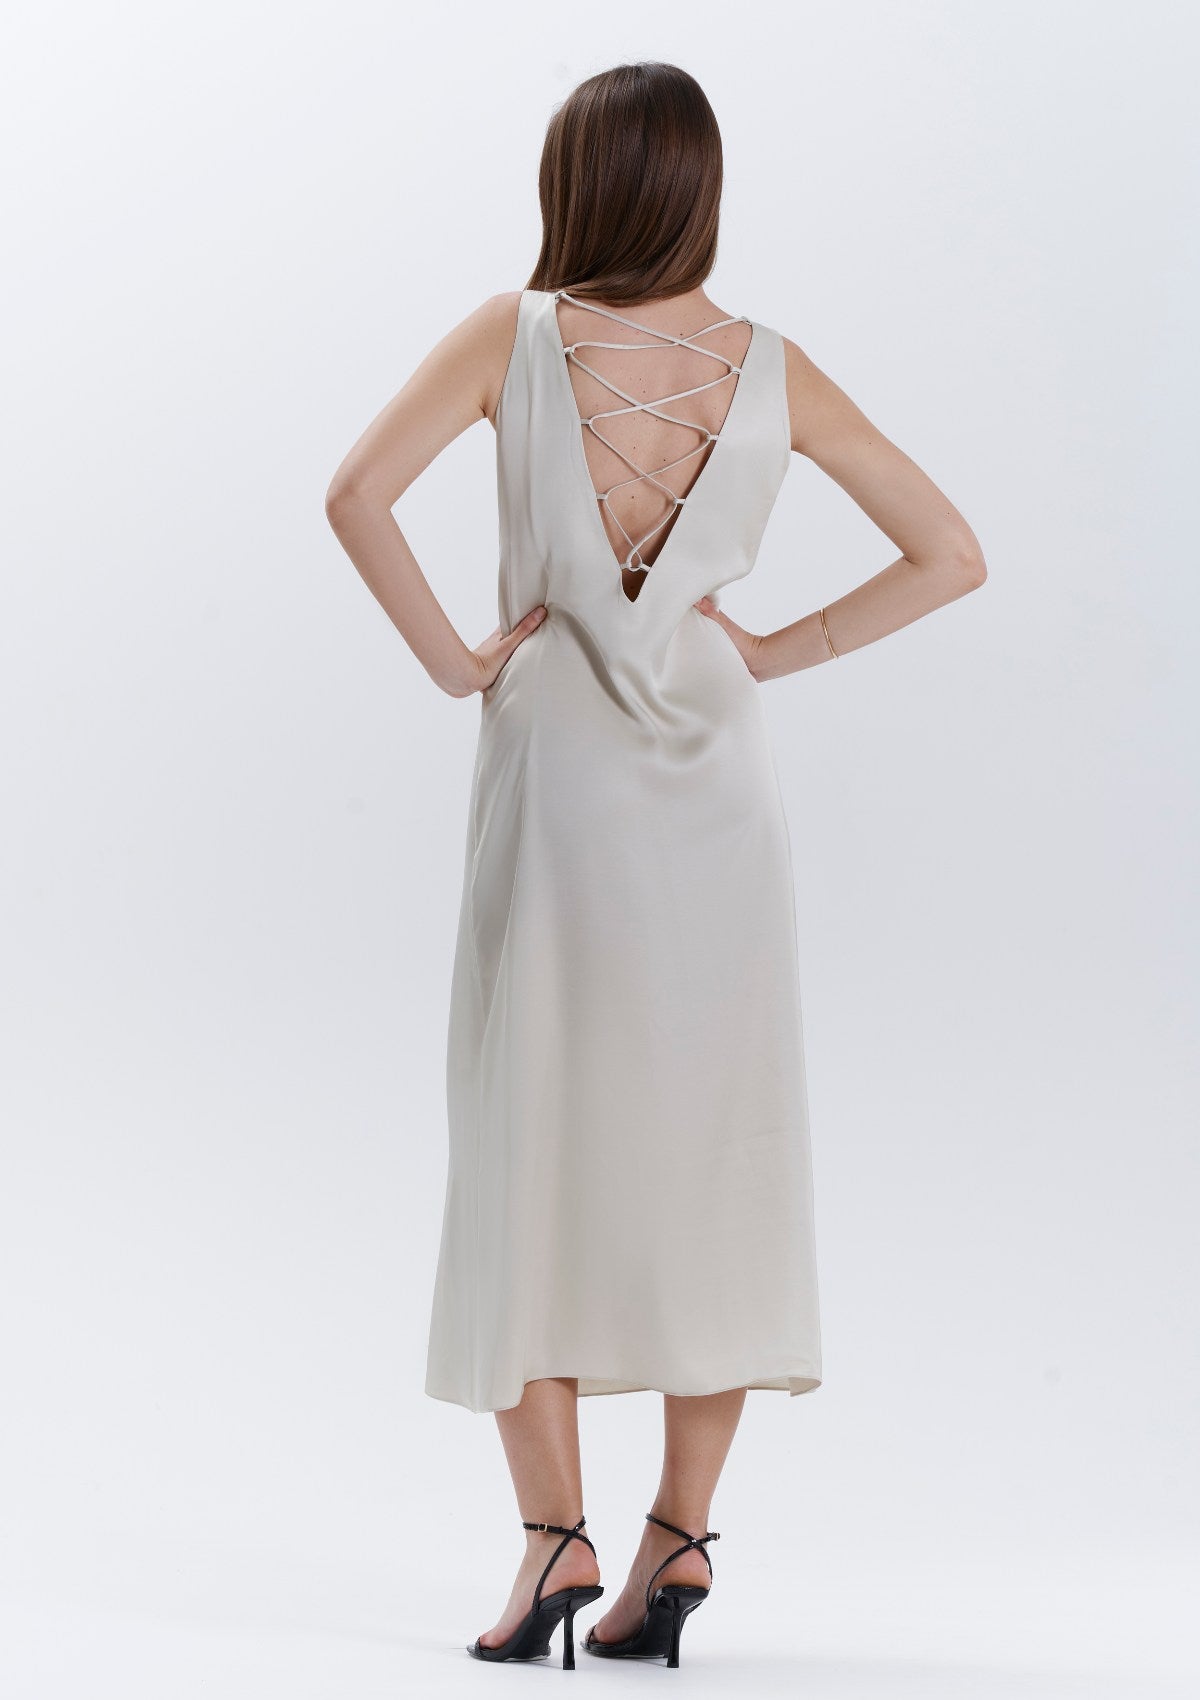 An evening beige dress with a multi straps low back